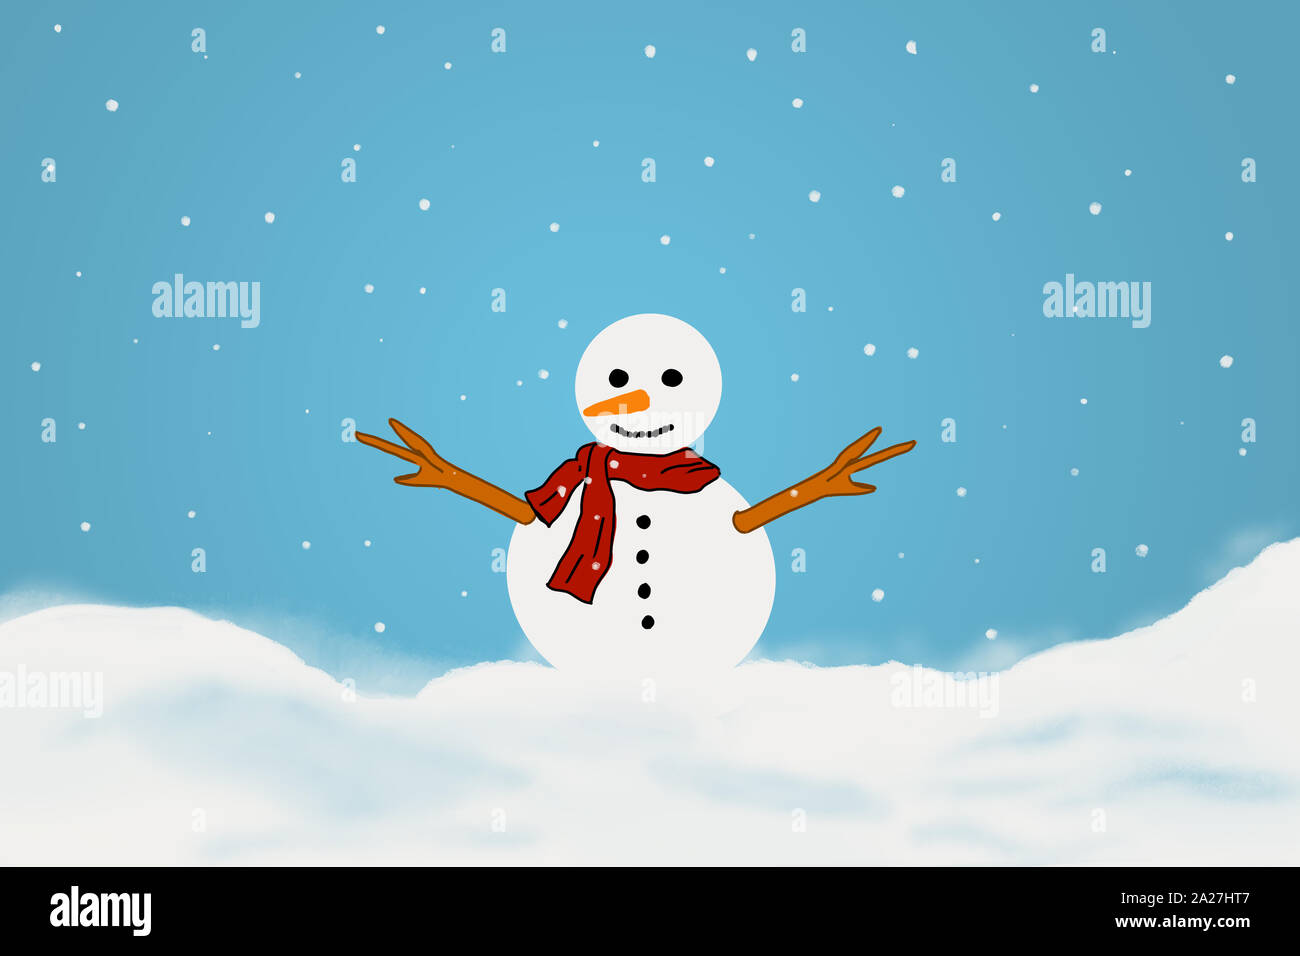 Snowman is celebrating the New year tree on snow with open sky. Stock Photo